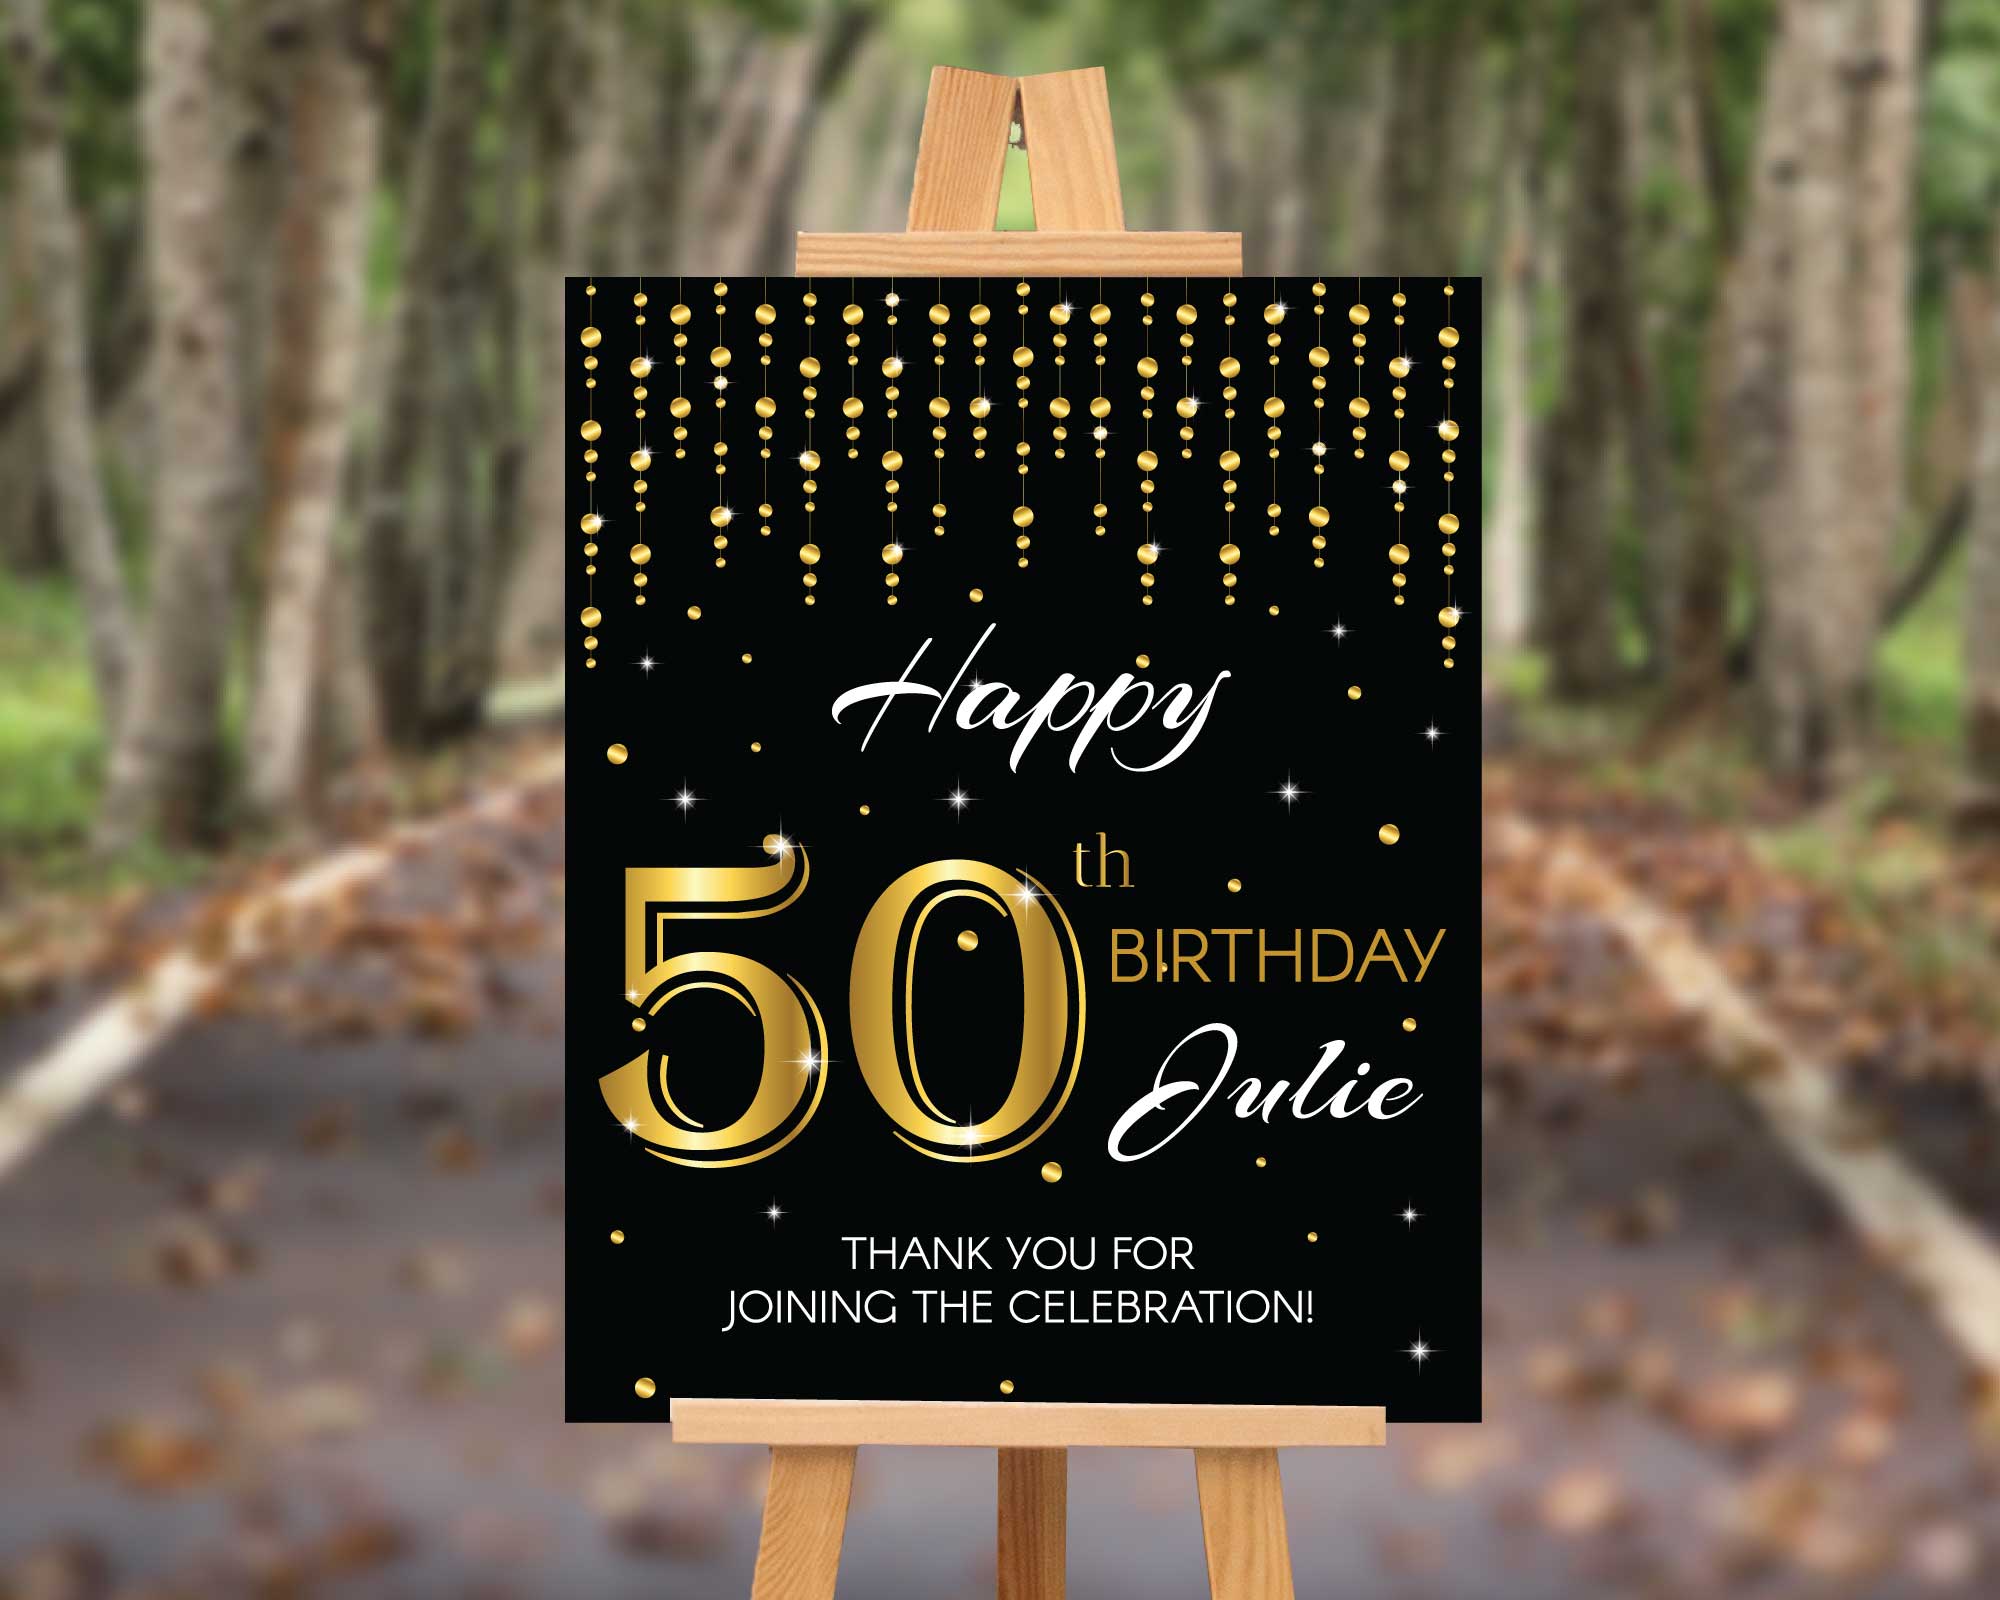 50th-birthday-party-sign-ideas-images-and-photos-finder